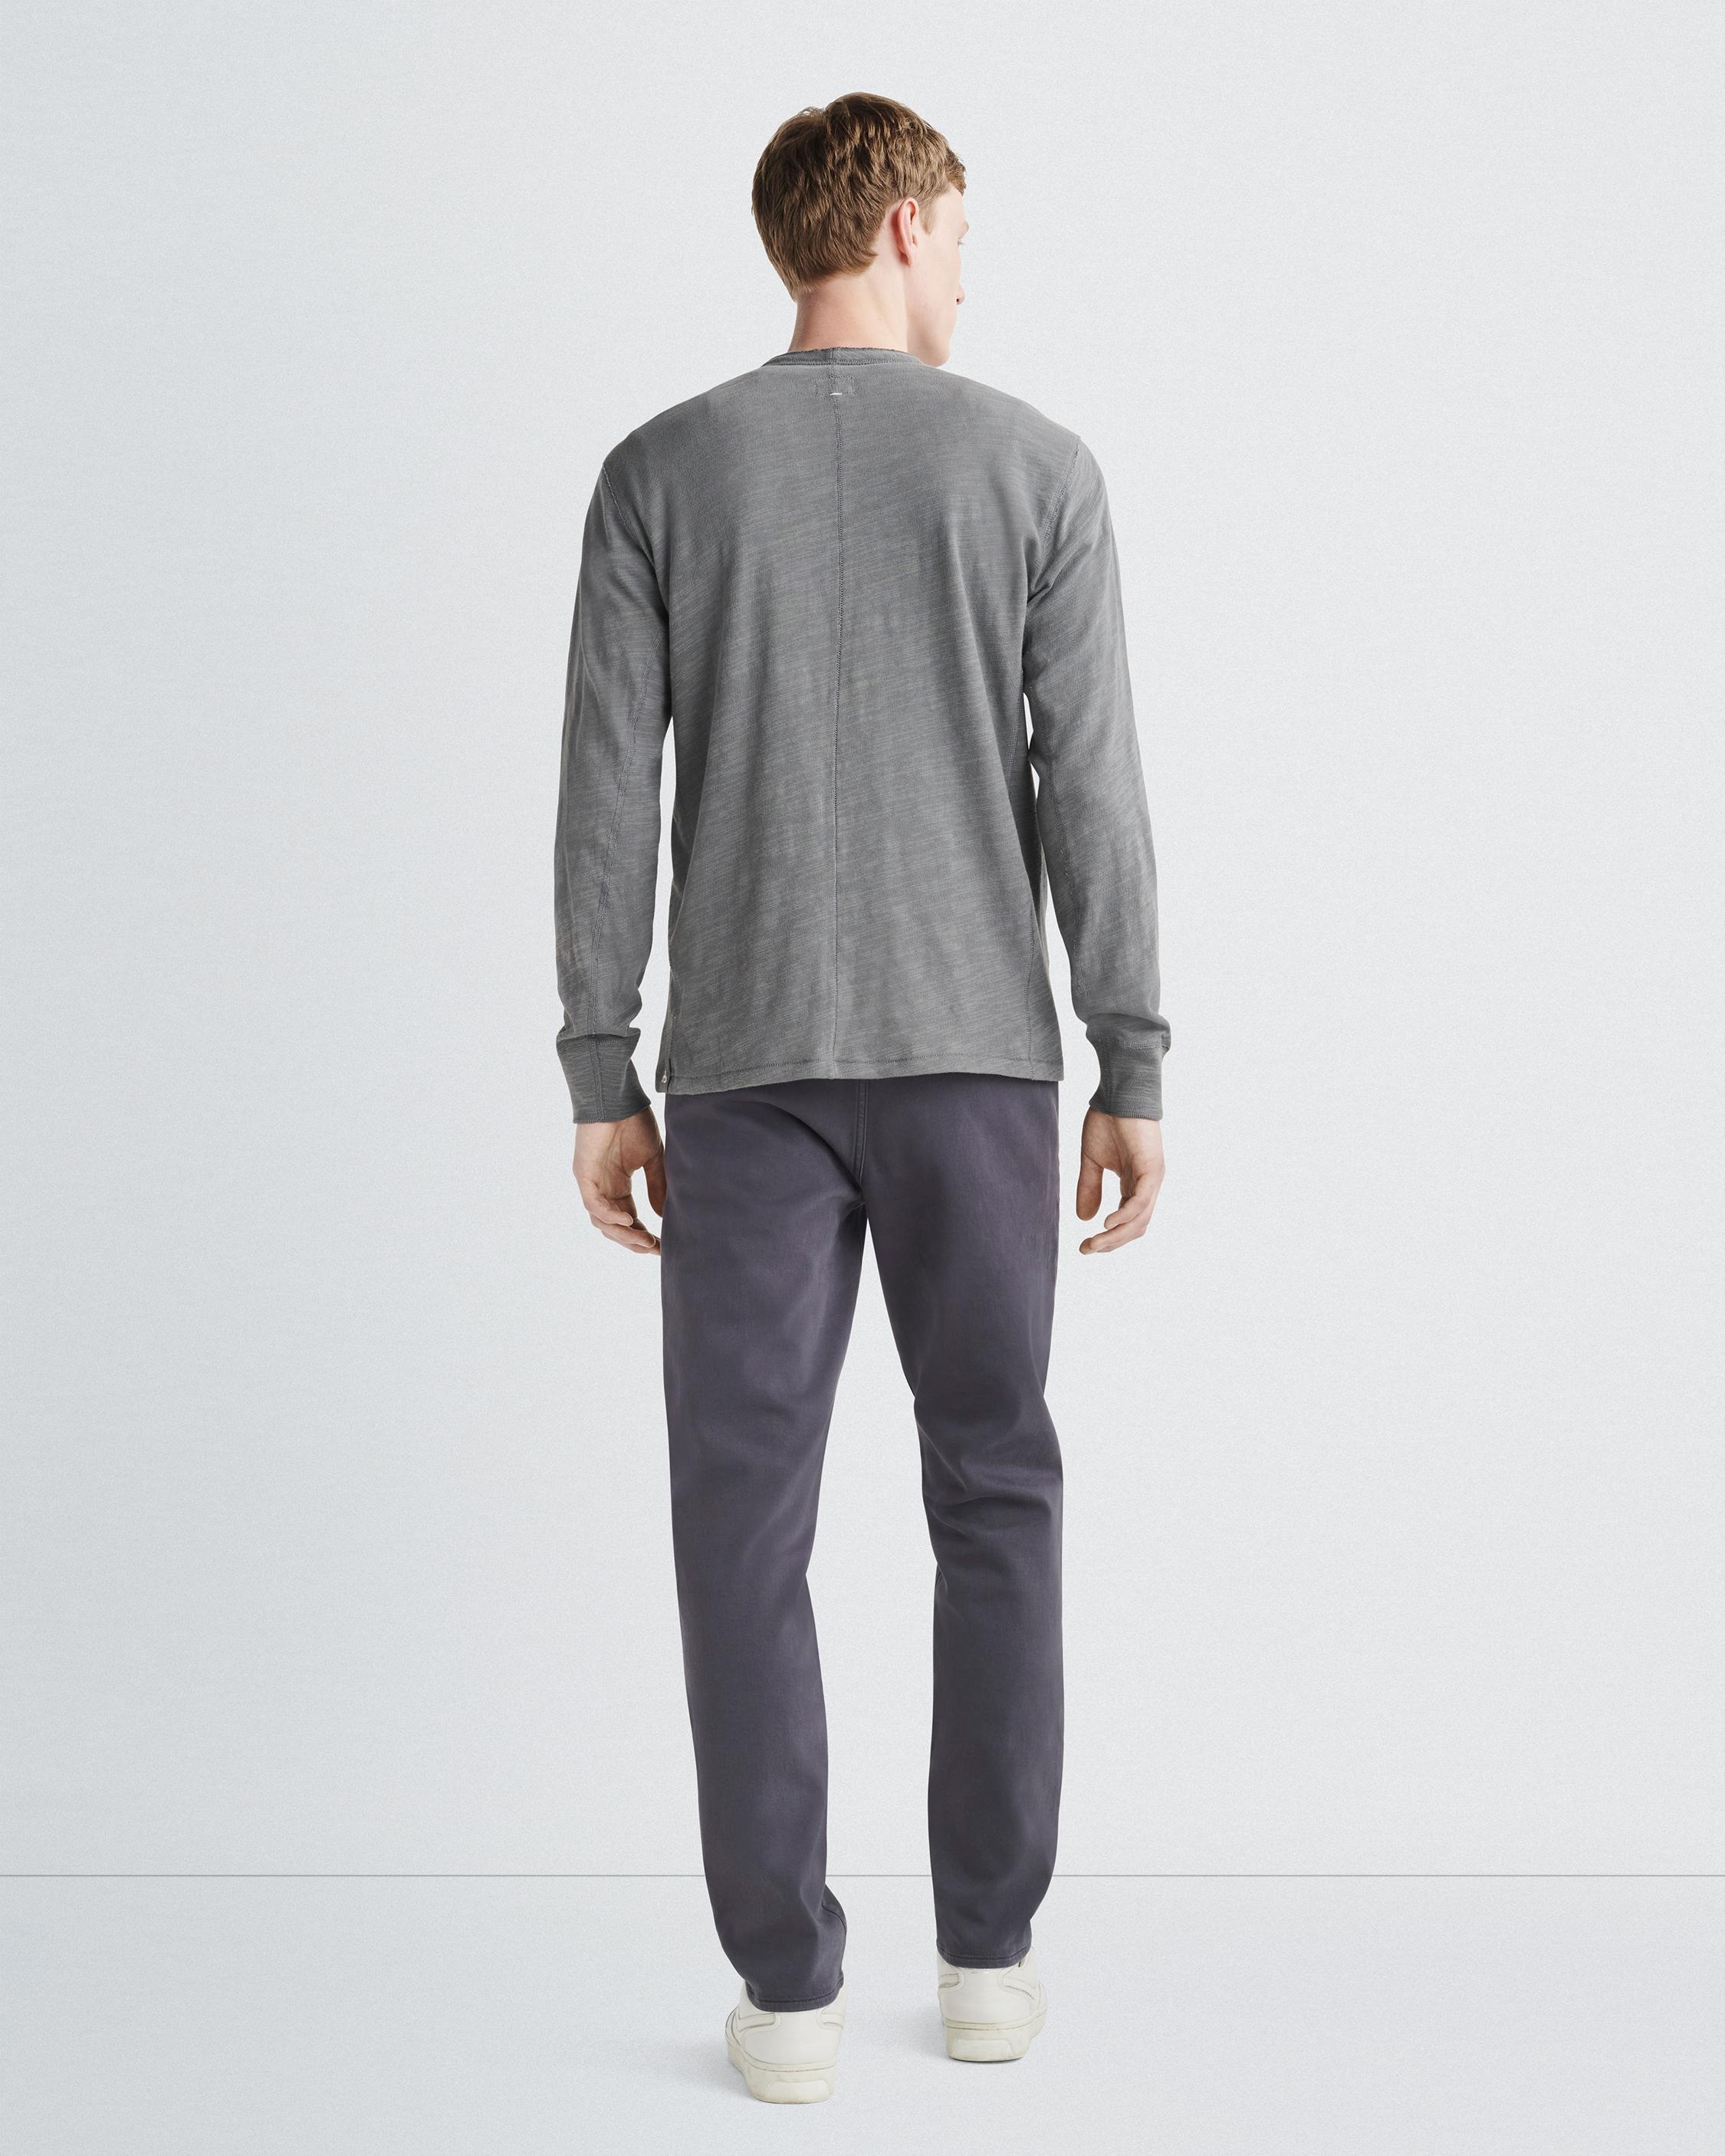 Fit 2 Action Loopback Chino
Slim Fit - 5